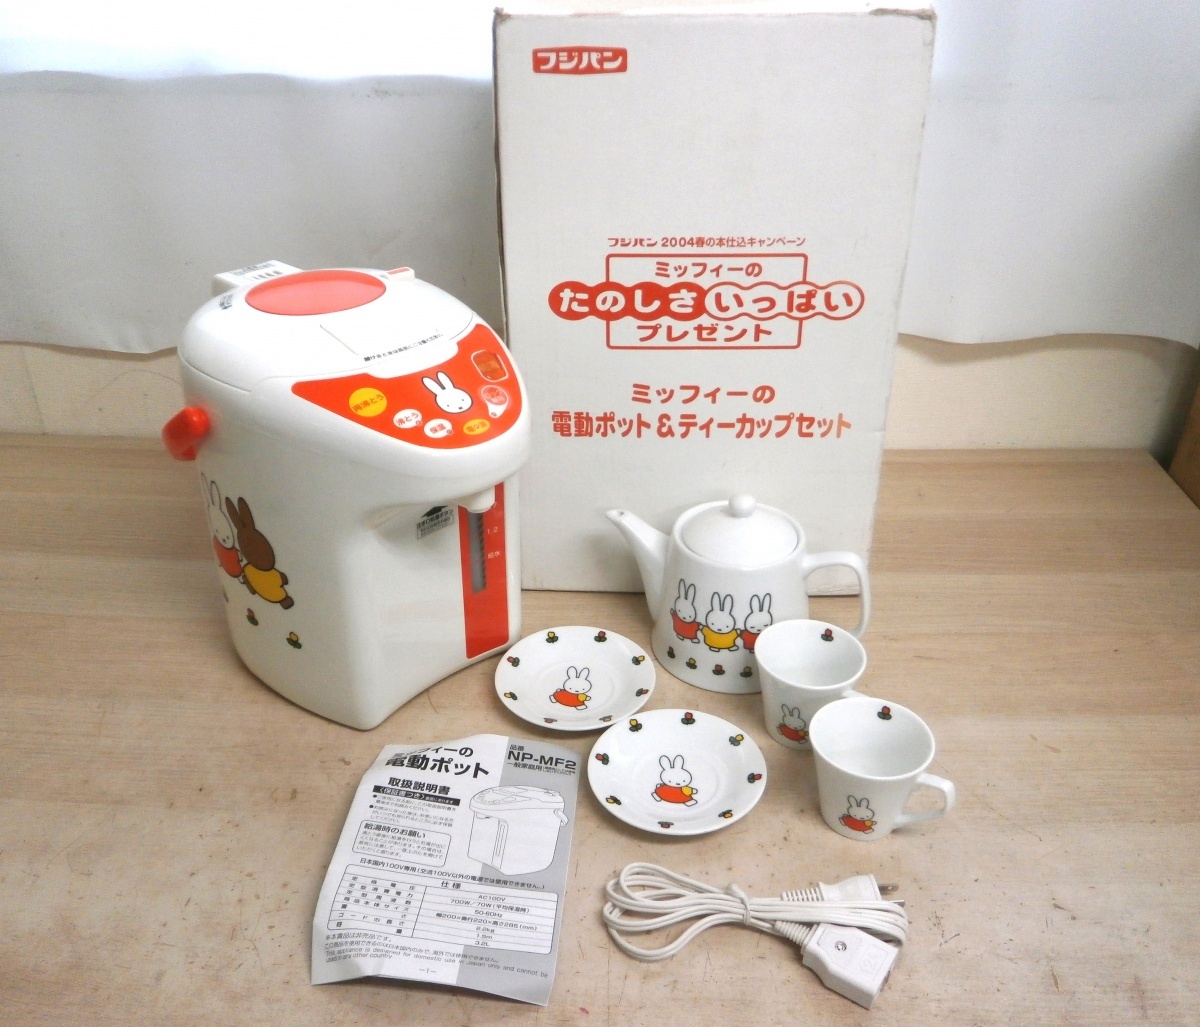  unused Fuji bread 2004 spring. book@. included campaign Miffy. electric pot & tea cup set NP-MF2 elected goods prize 